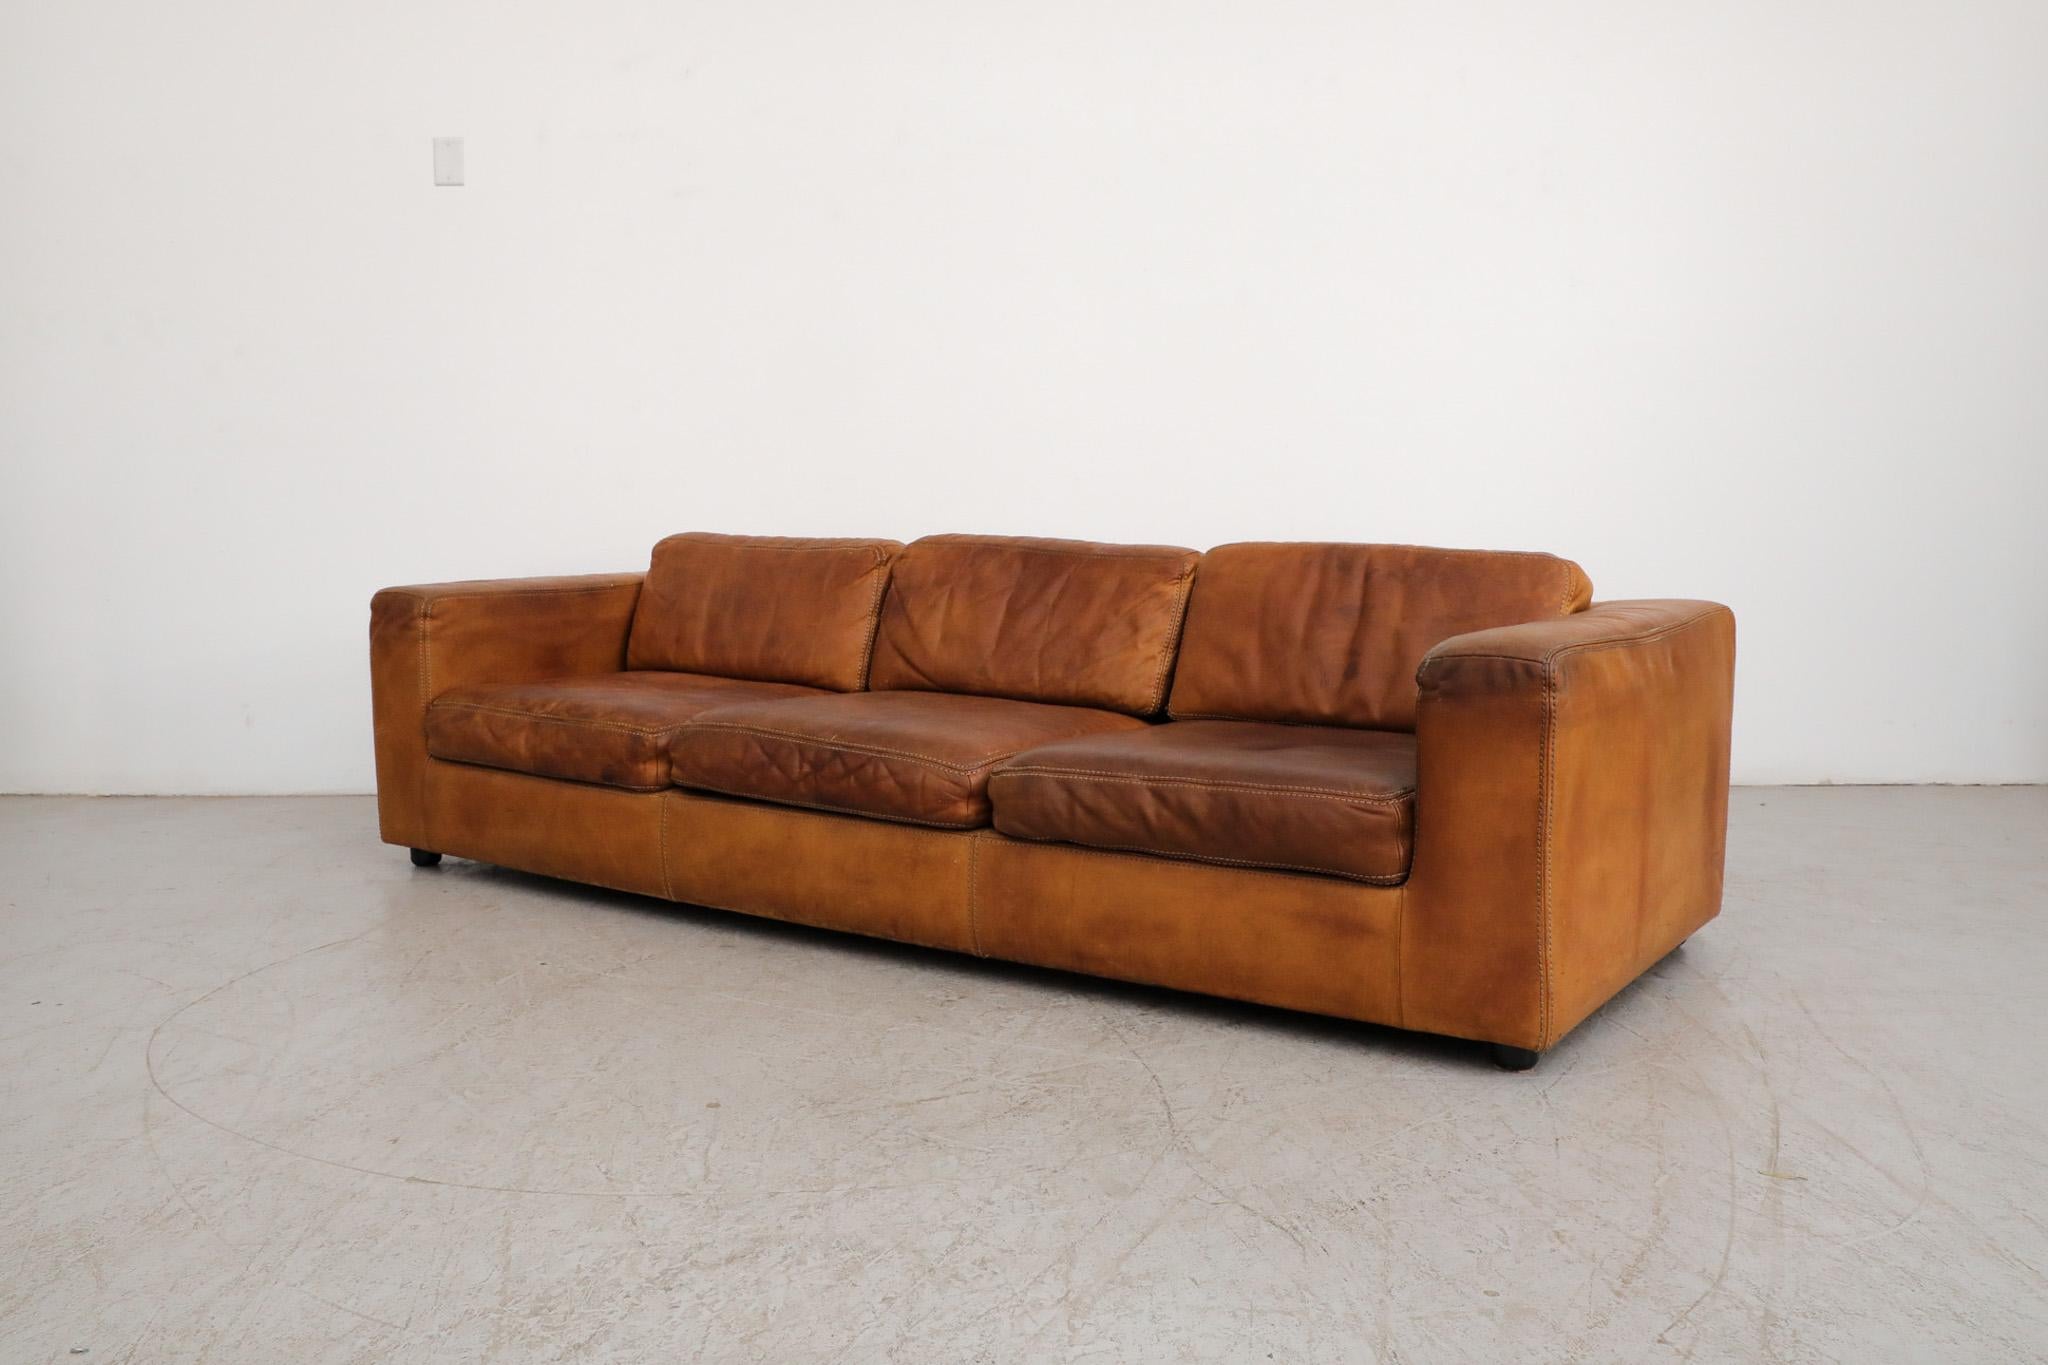 Mid-Century natural leather streamline three seater sofa. Large and comfy natural leather sofa with removable cushions and attractive patina. In original condition with visible wear consistent with age and regular use. 